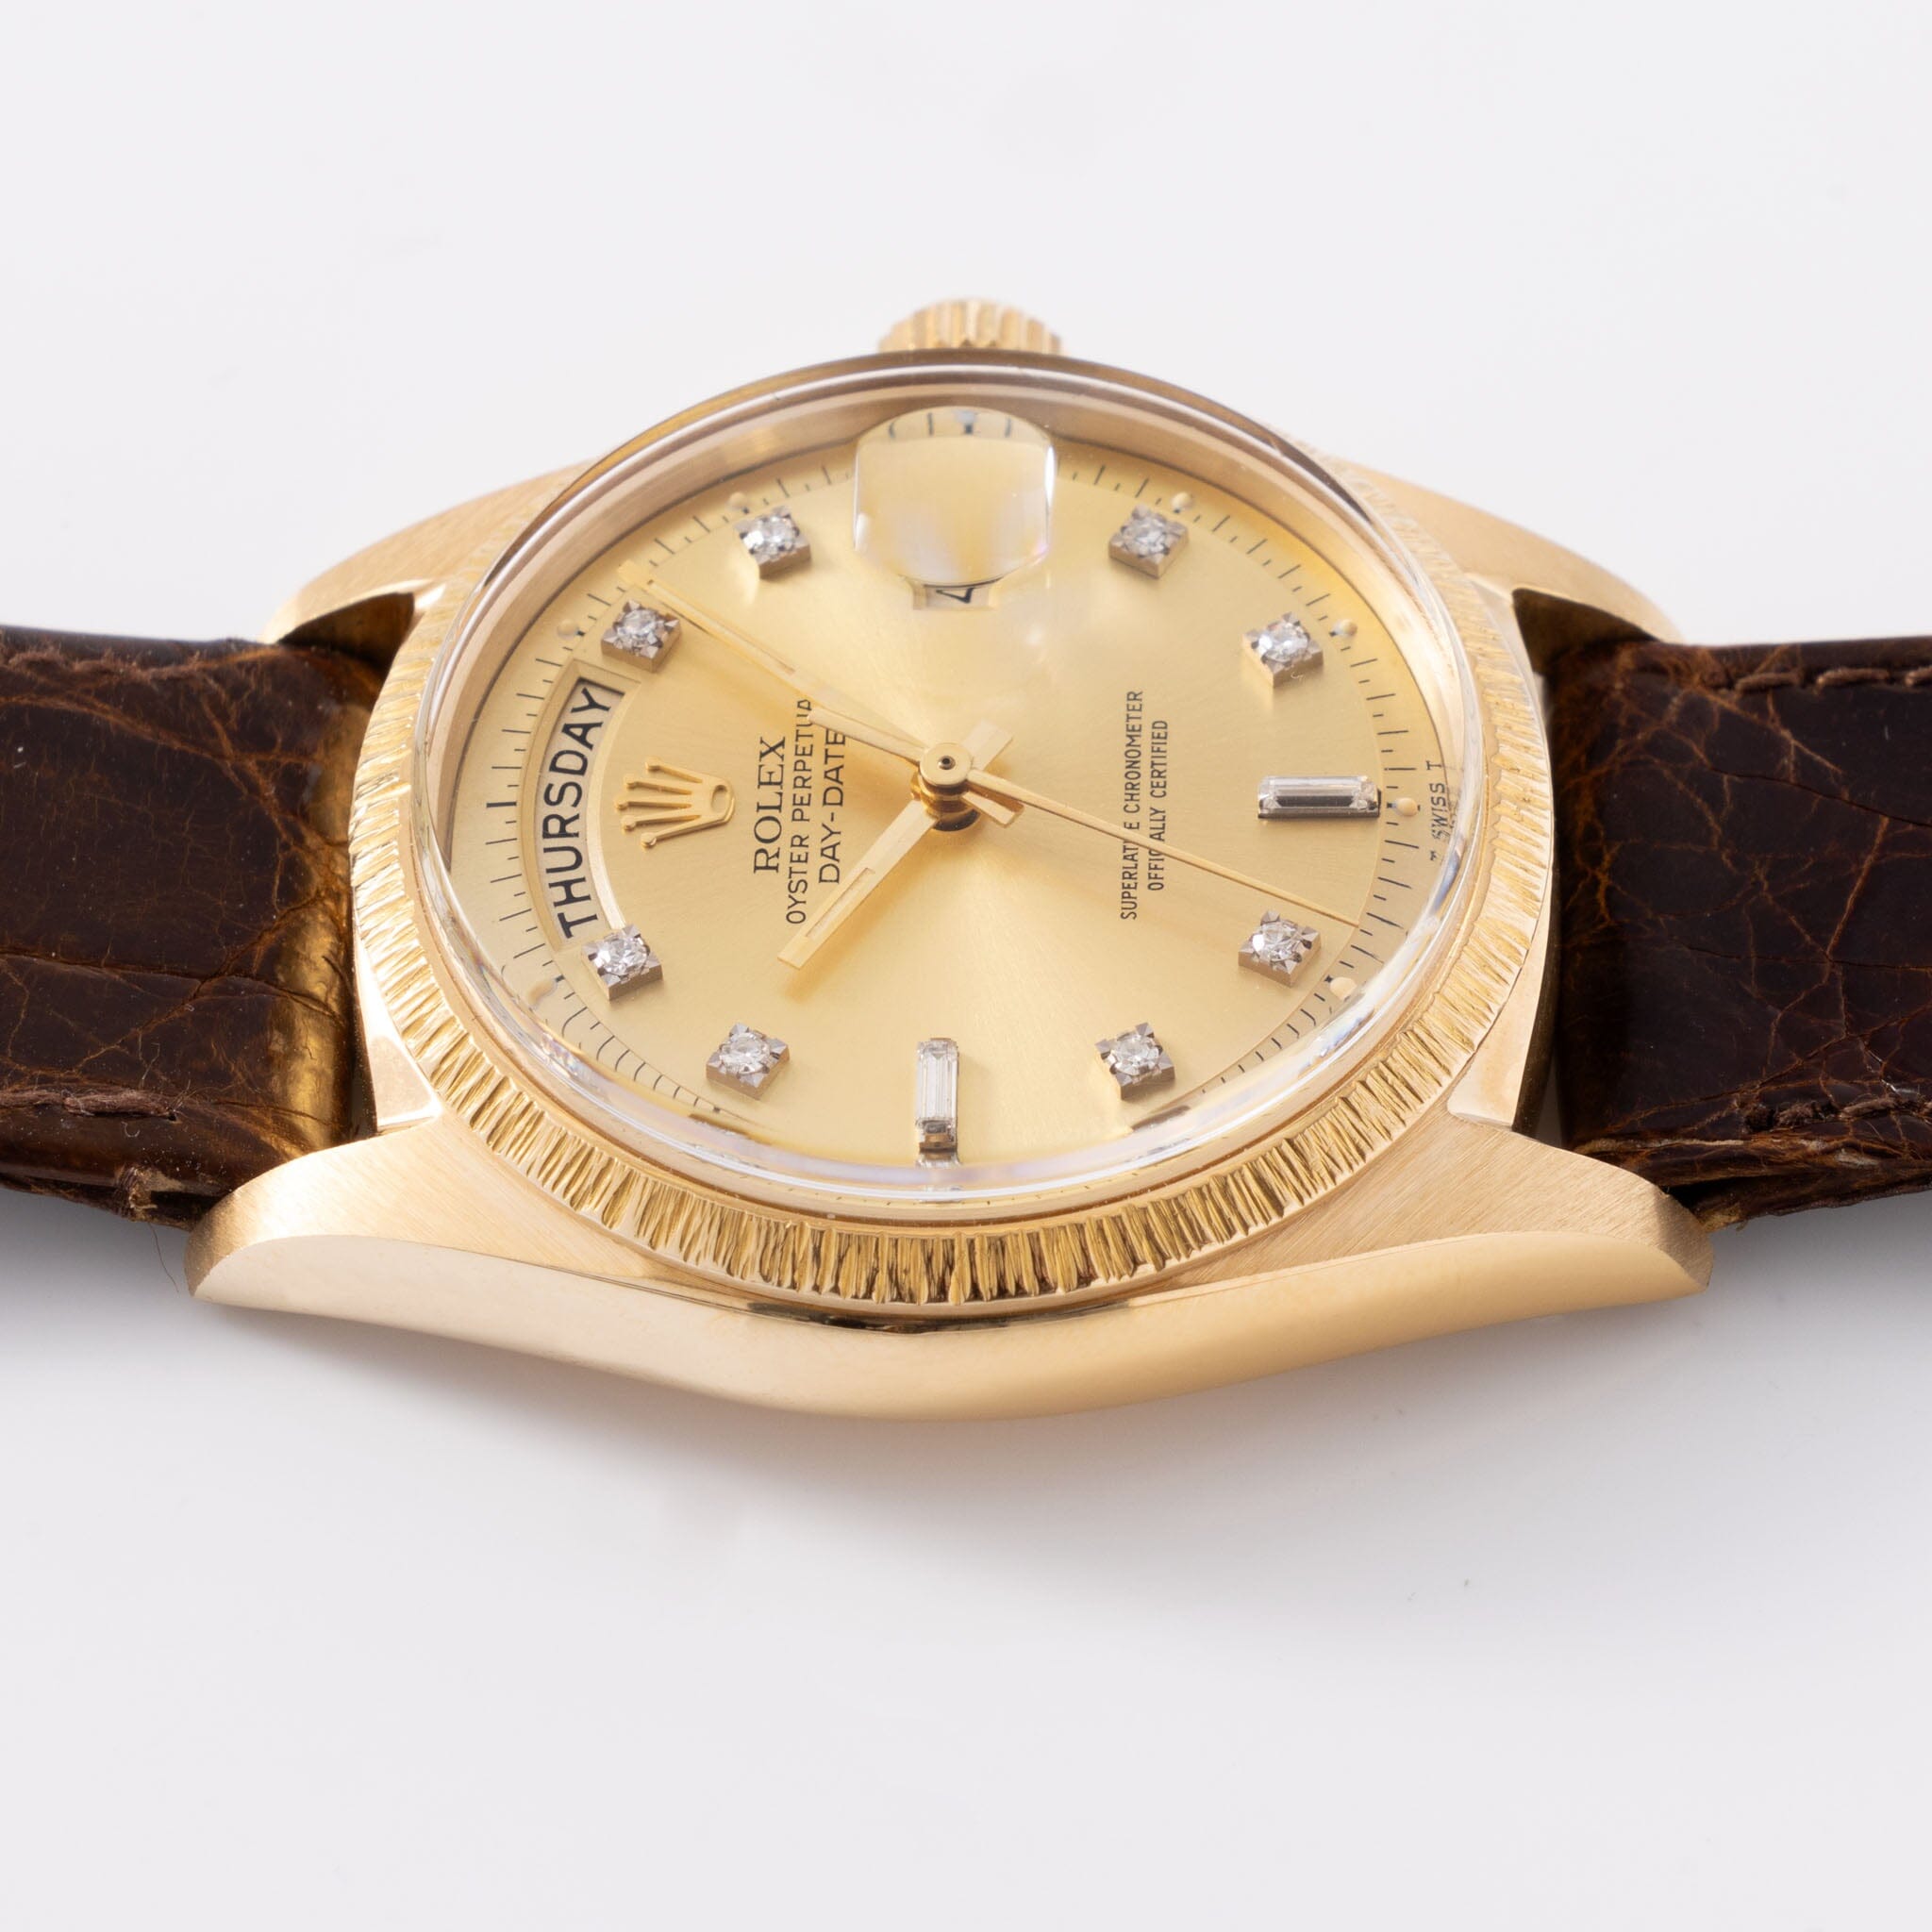 Rolex Day-Date Yellow Gold Champagne Diamond Hours Dial Ref 1807